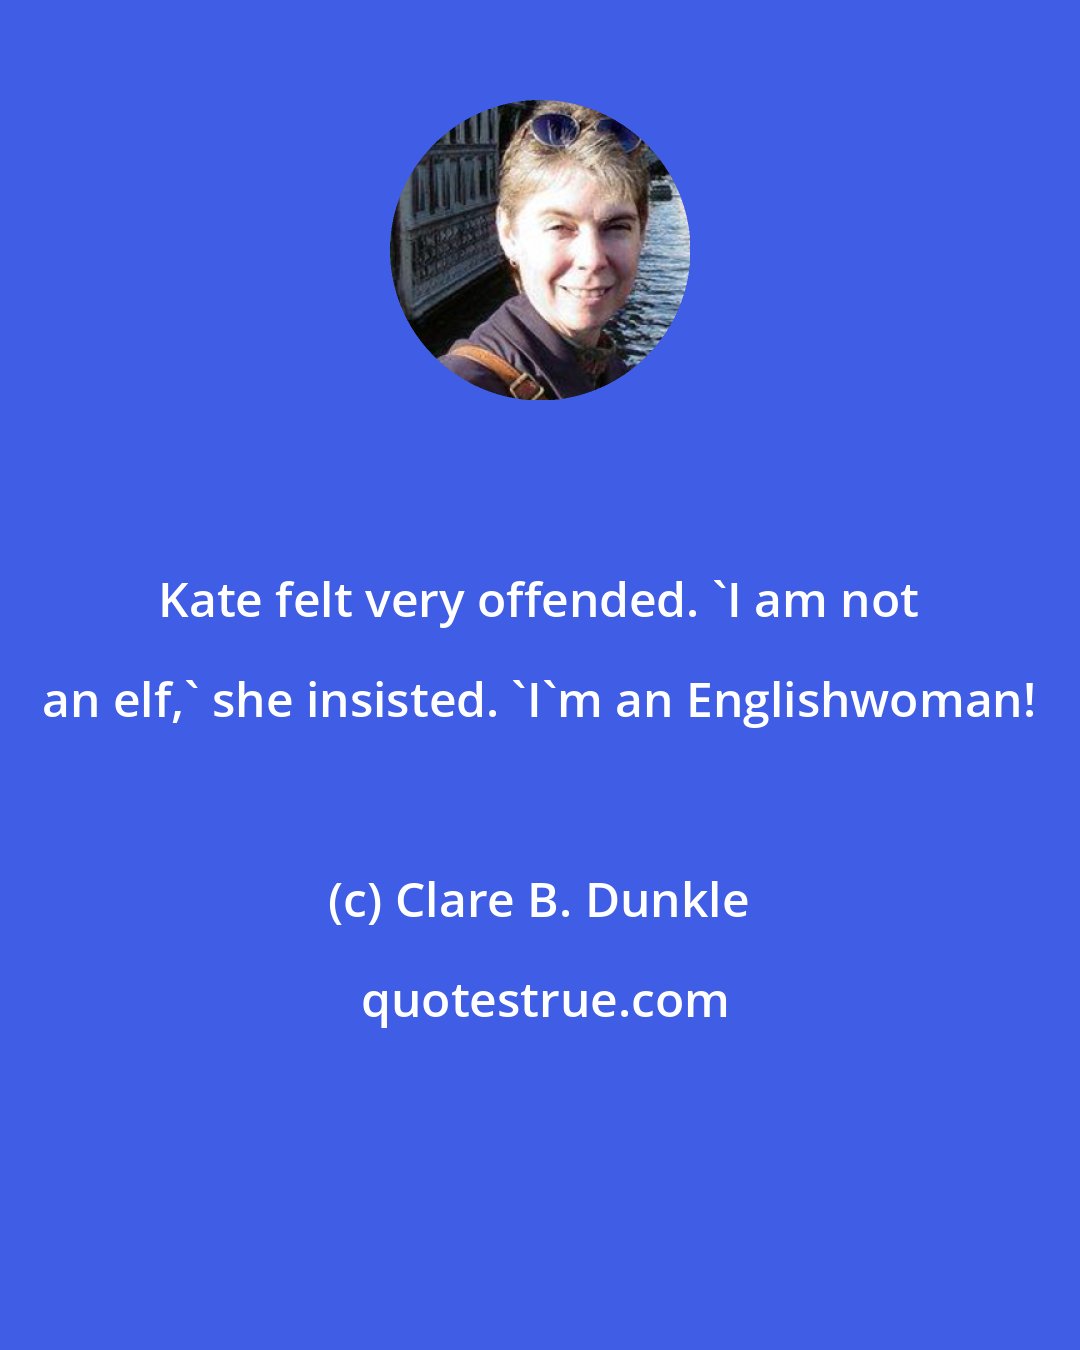 Clare B. Dunkle: Kate felt very offended. 'I am not an elf,' she insisted. 'I'm an Englishwoman!